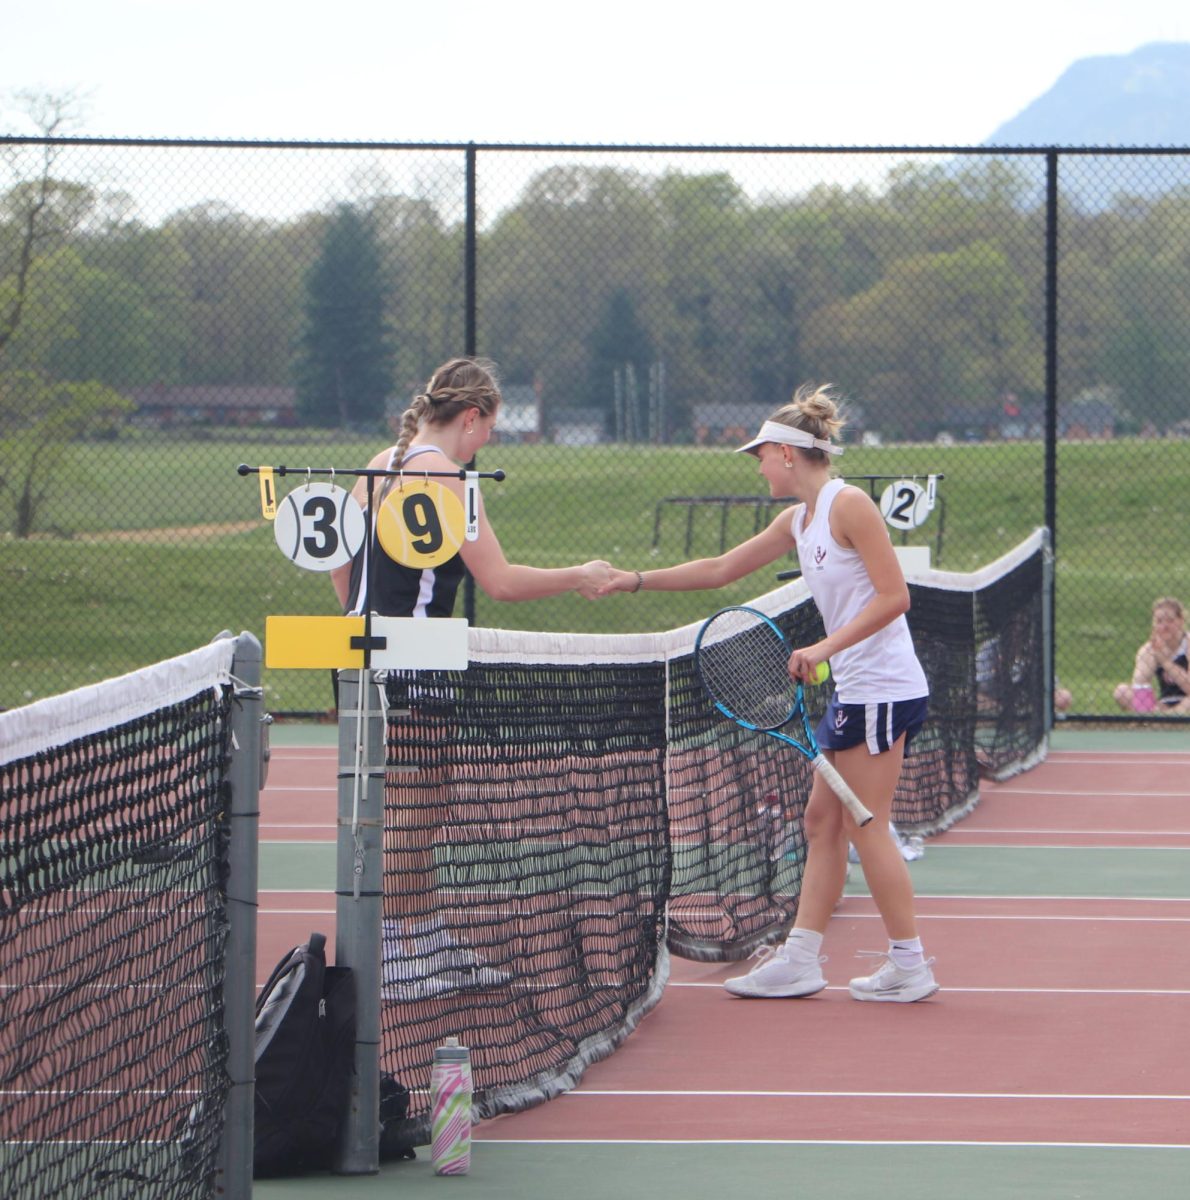 Senior Sophia Pimentel Yoder shakes her opponents hand after winning her first match. 4-19